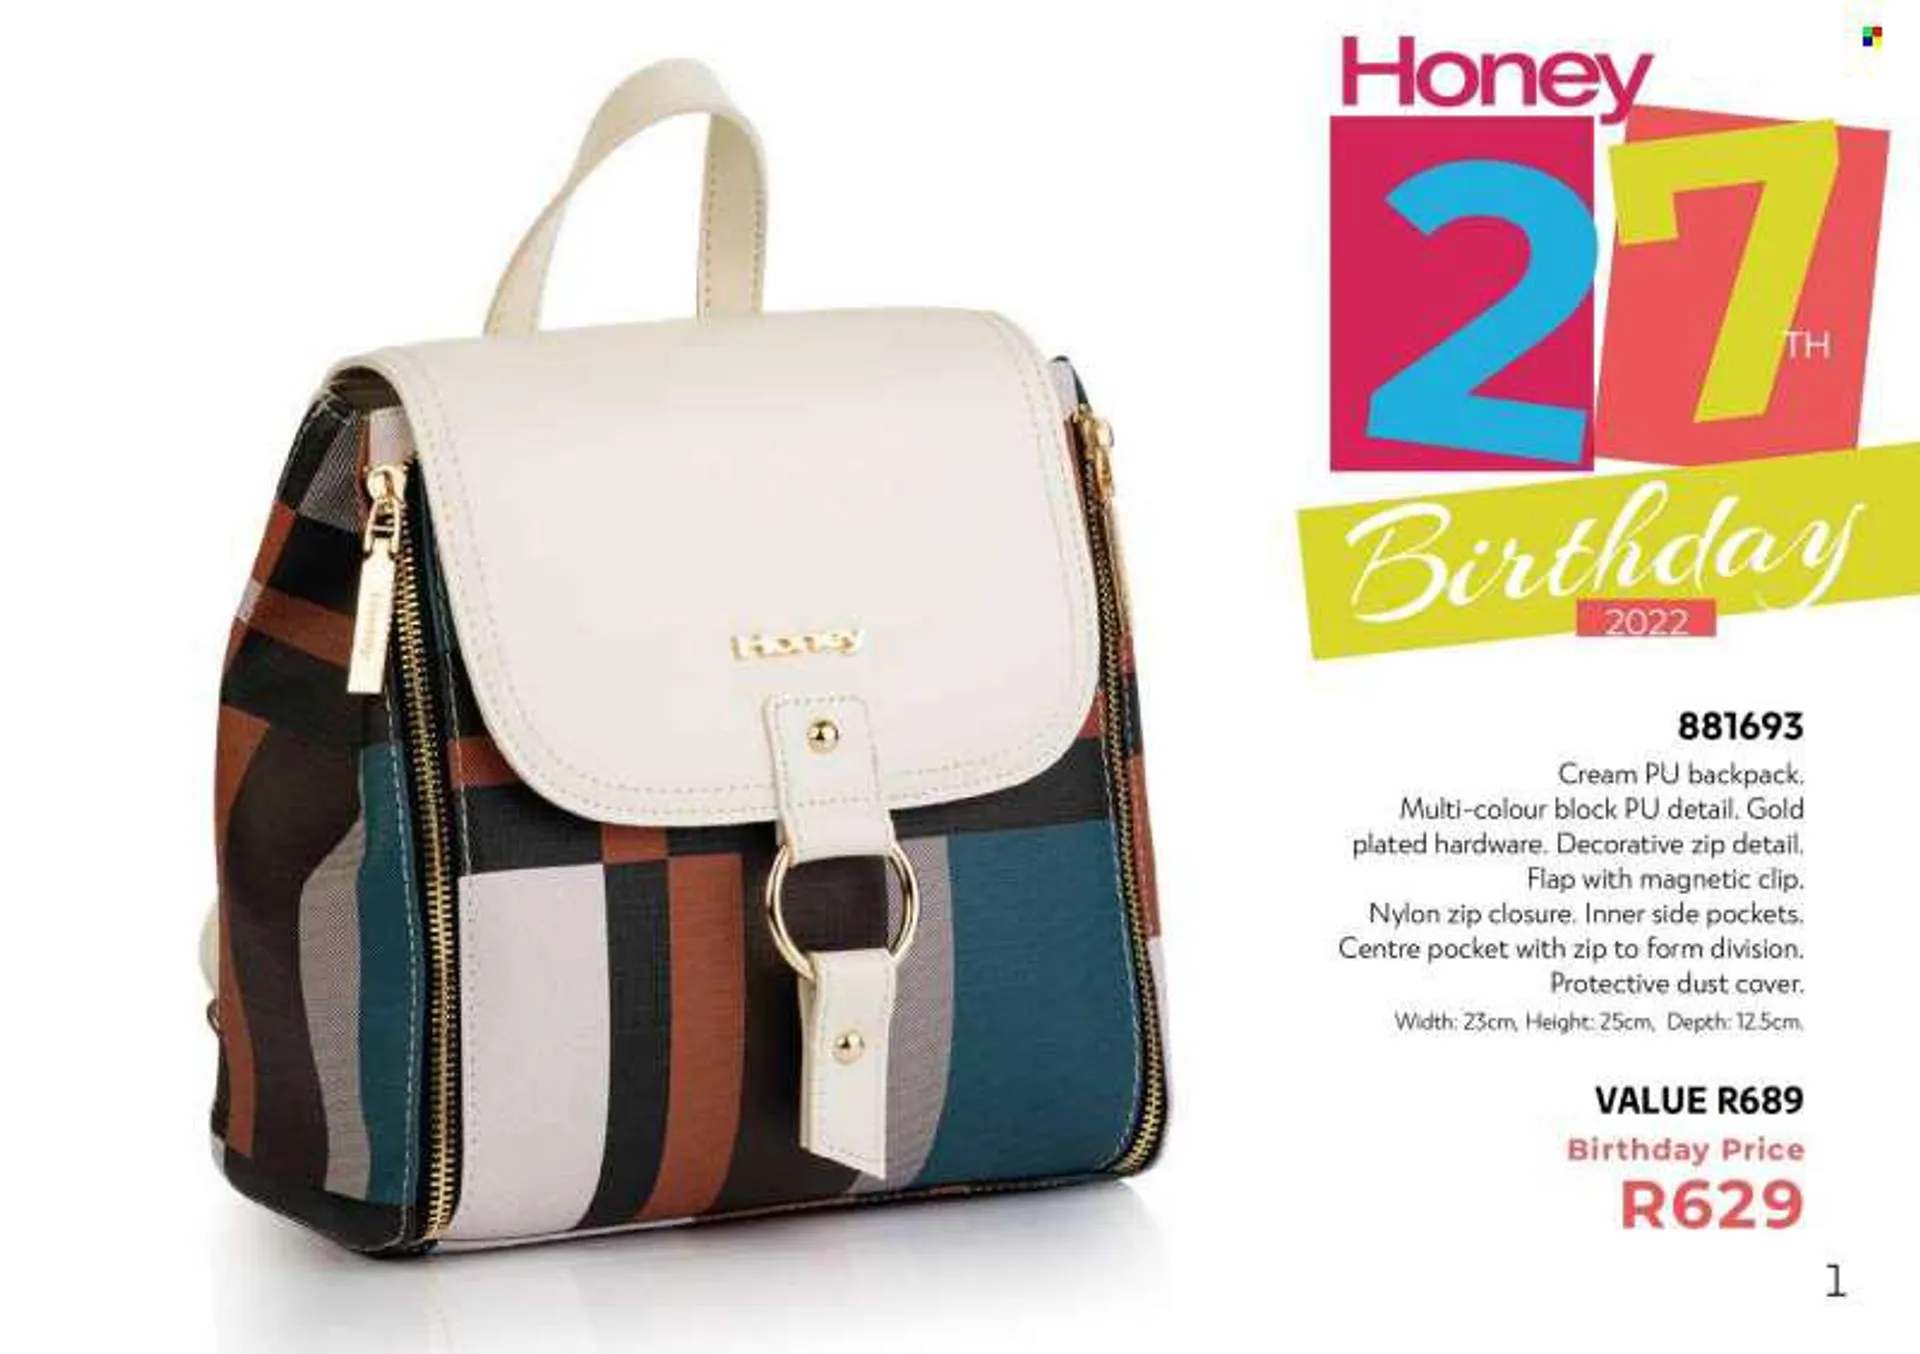 Honey catalogue  - Sales products - backpack. Page 3.